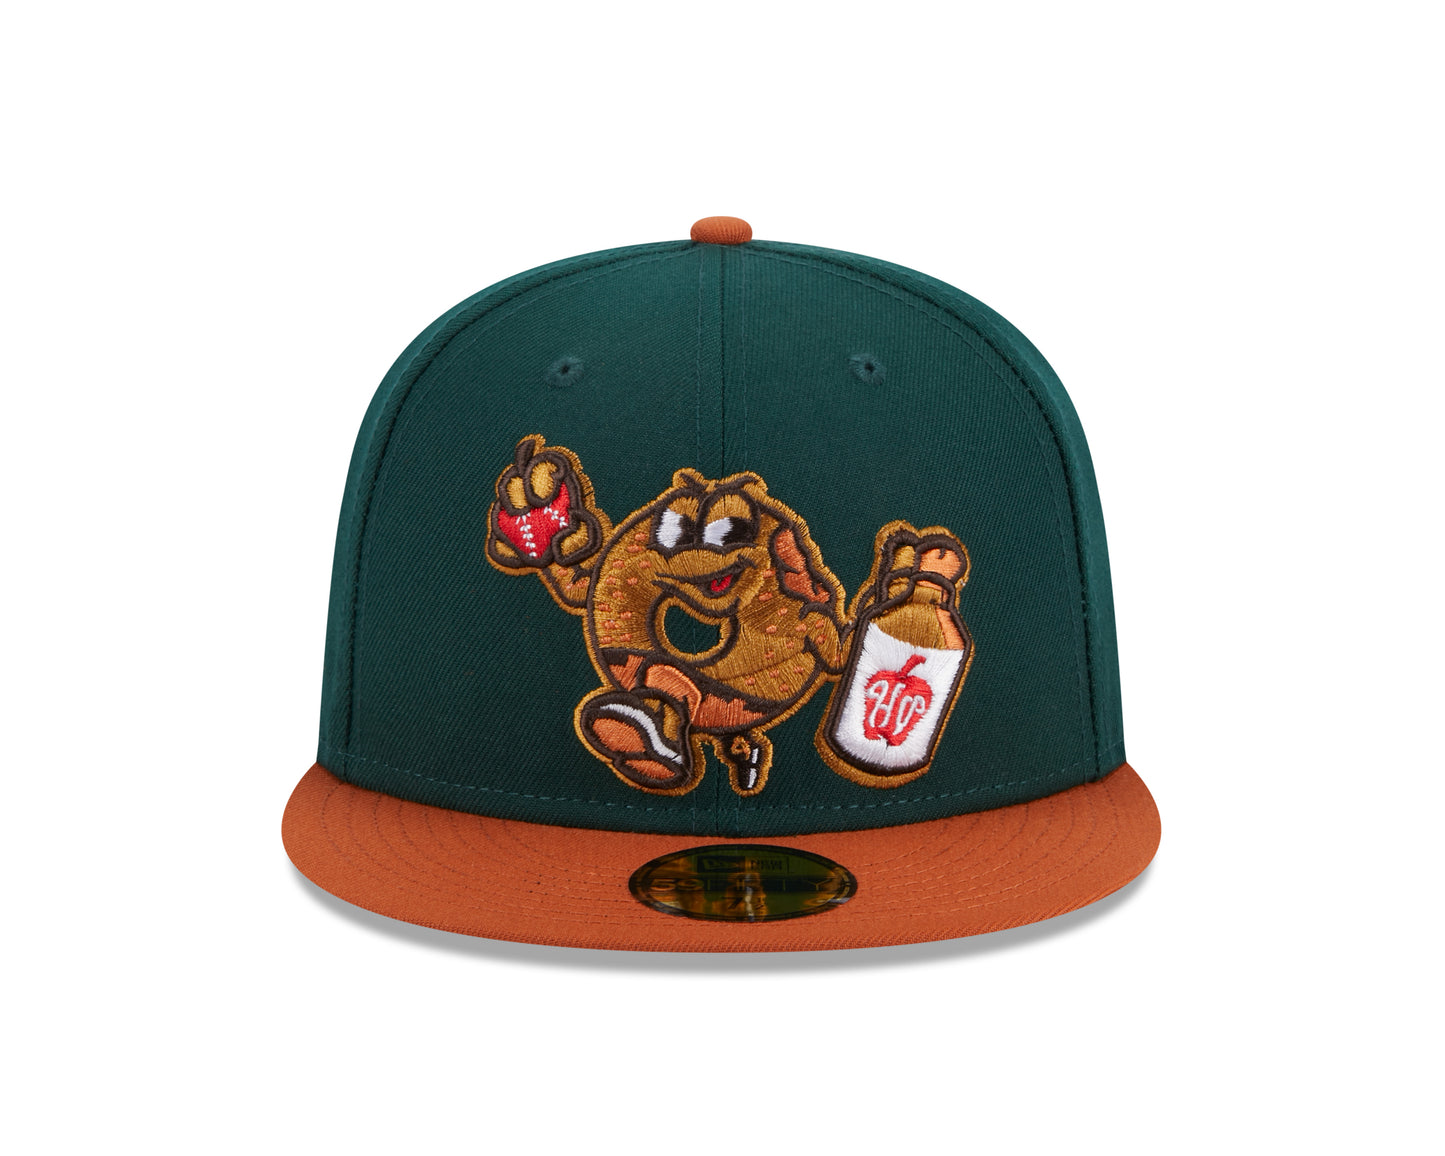 New Era - 59fifty Fitted - MiLB - Theme Night - Hudson Valley Renegades - Green - Headz Up 